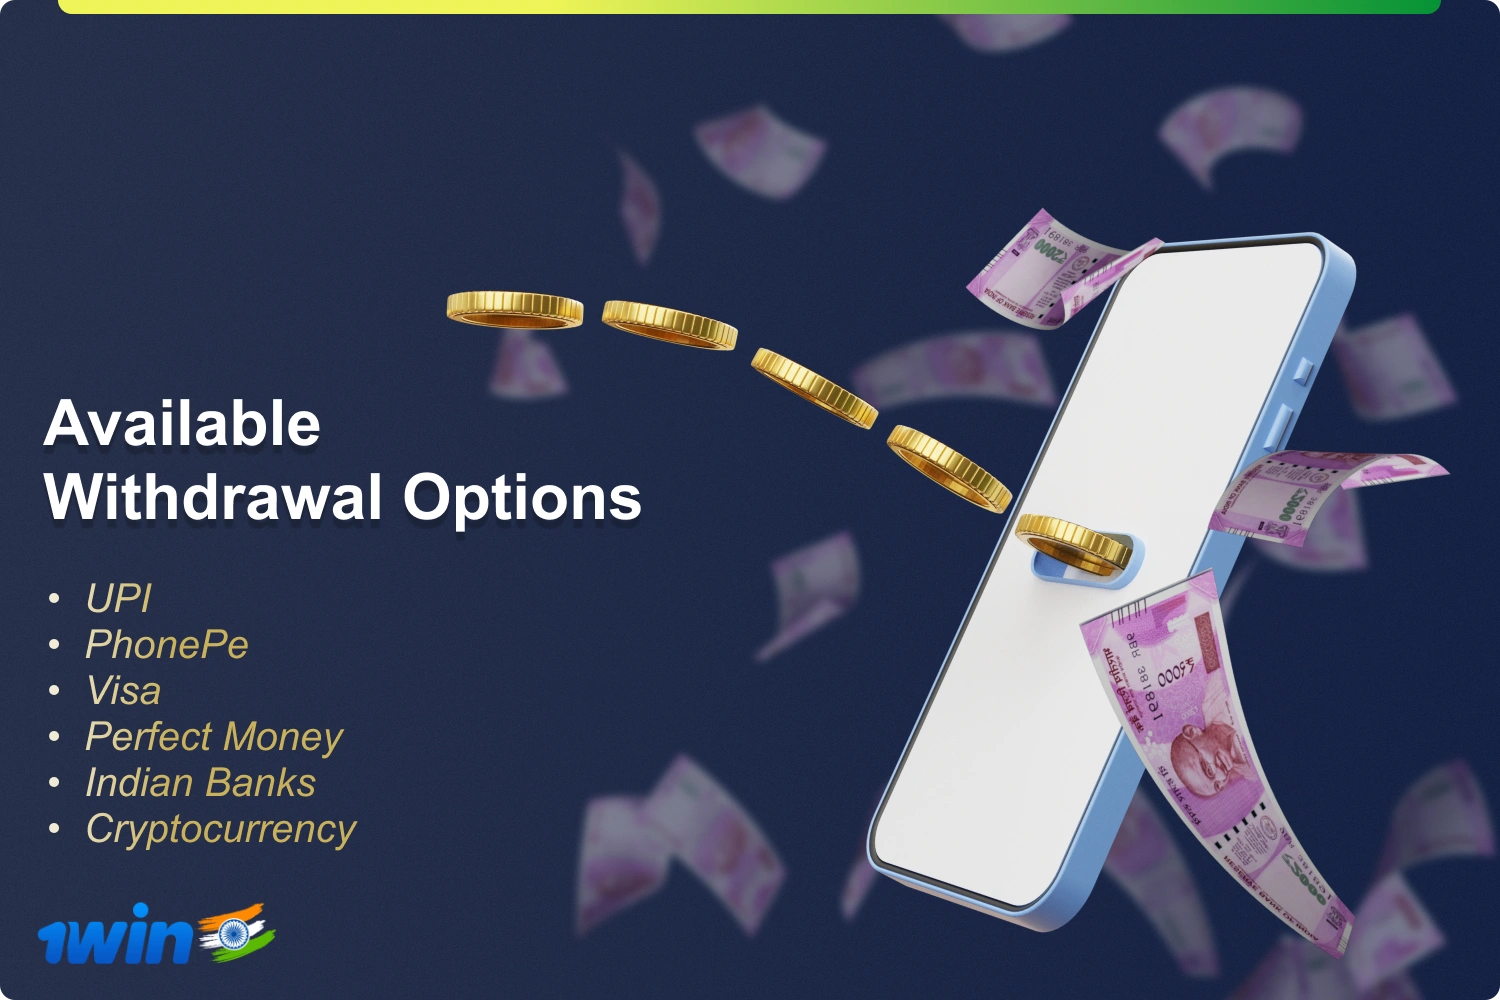 1win has over 15 various tools and withdrawal methods that are favourable for Indian gamers